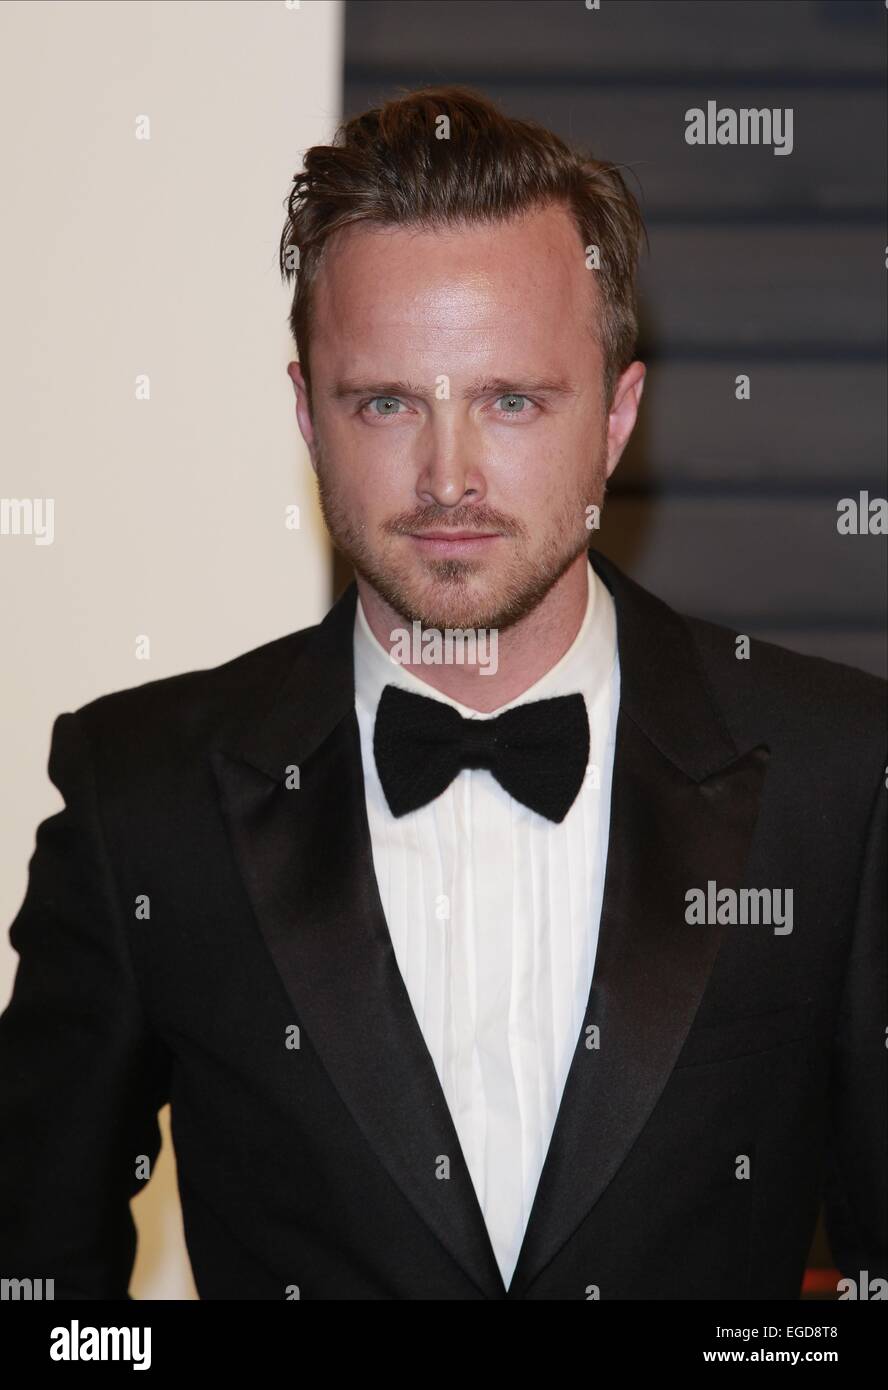 Los Angeles, California, USA. 23rd Feb, 2015. Aaron Paul Actor Vanity Fair Oscar Party 2015 Los Angeles, Usa 23 February 2015 Dit76982 © Allstar Picture Library/Alamy Live News Credit:  Allstar Picture Library/Alamy Live News Stock Photo